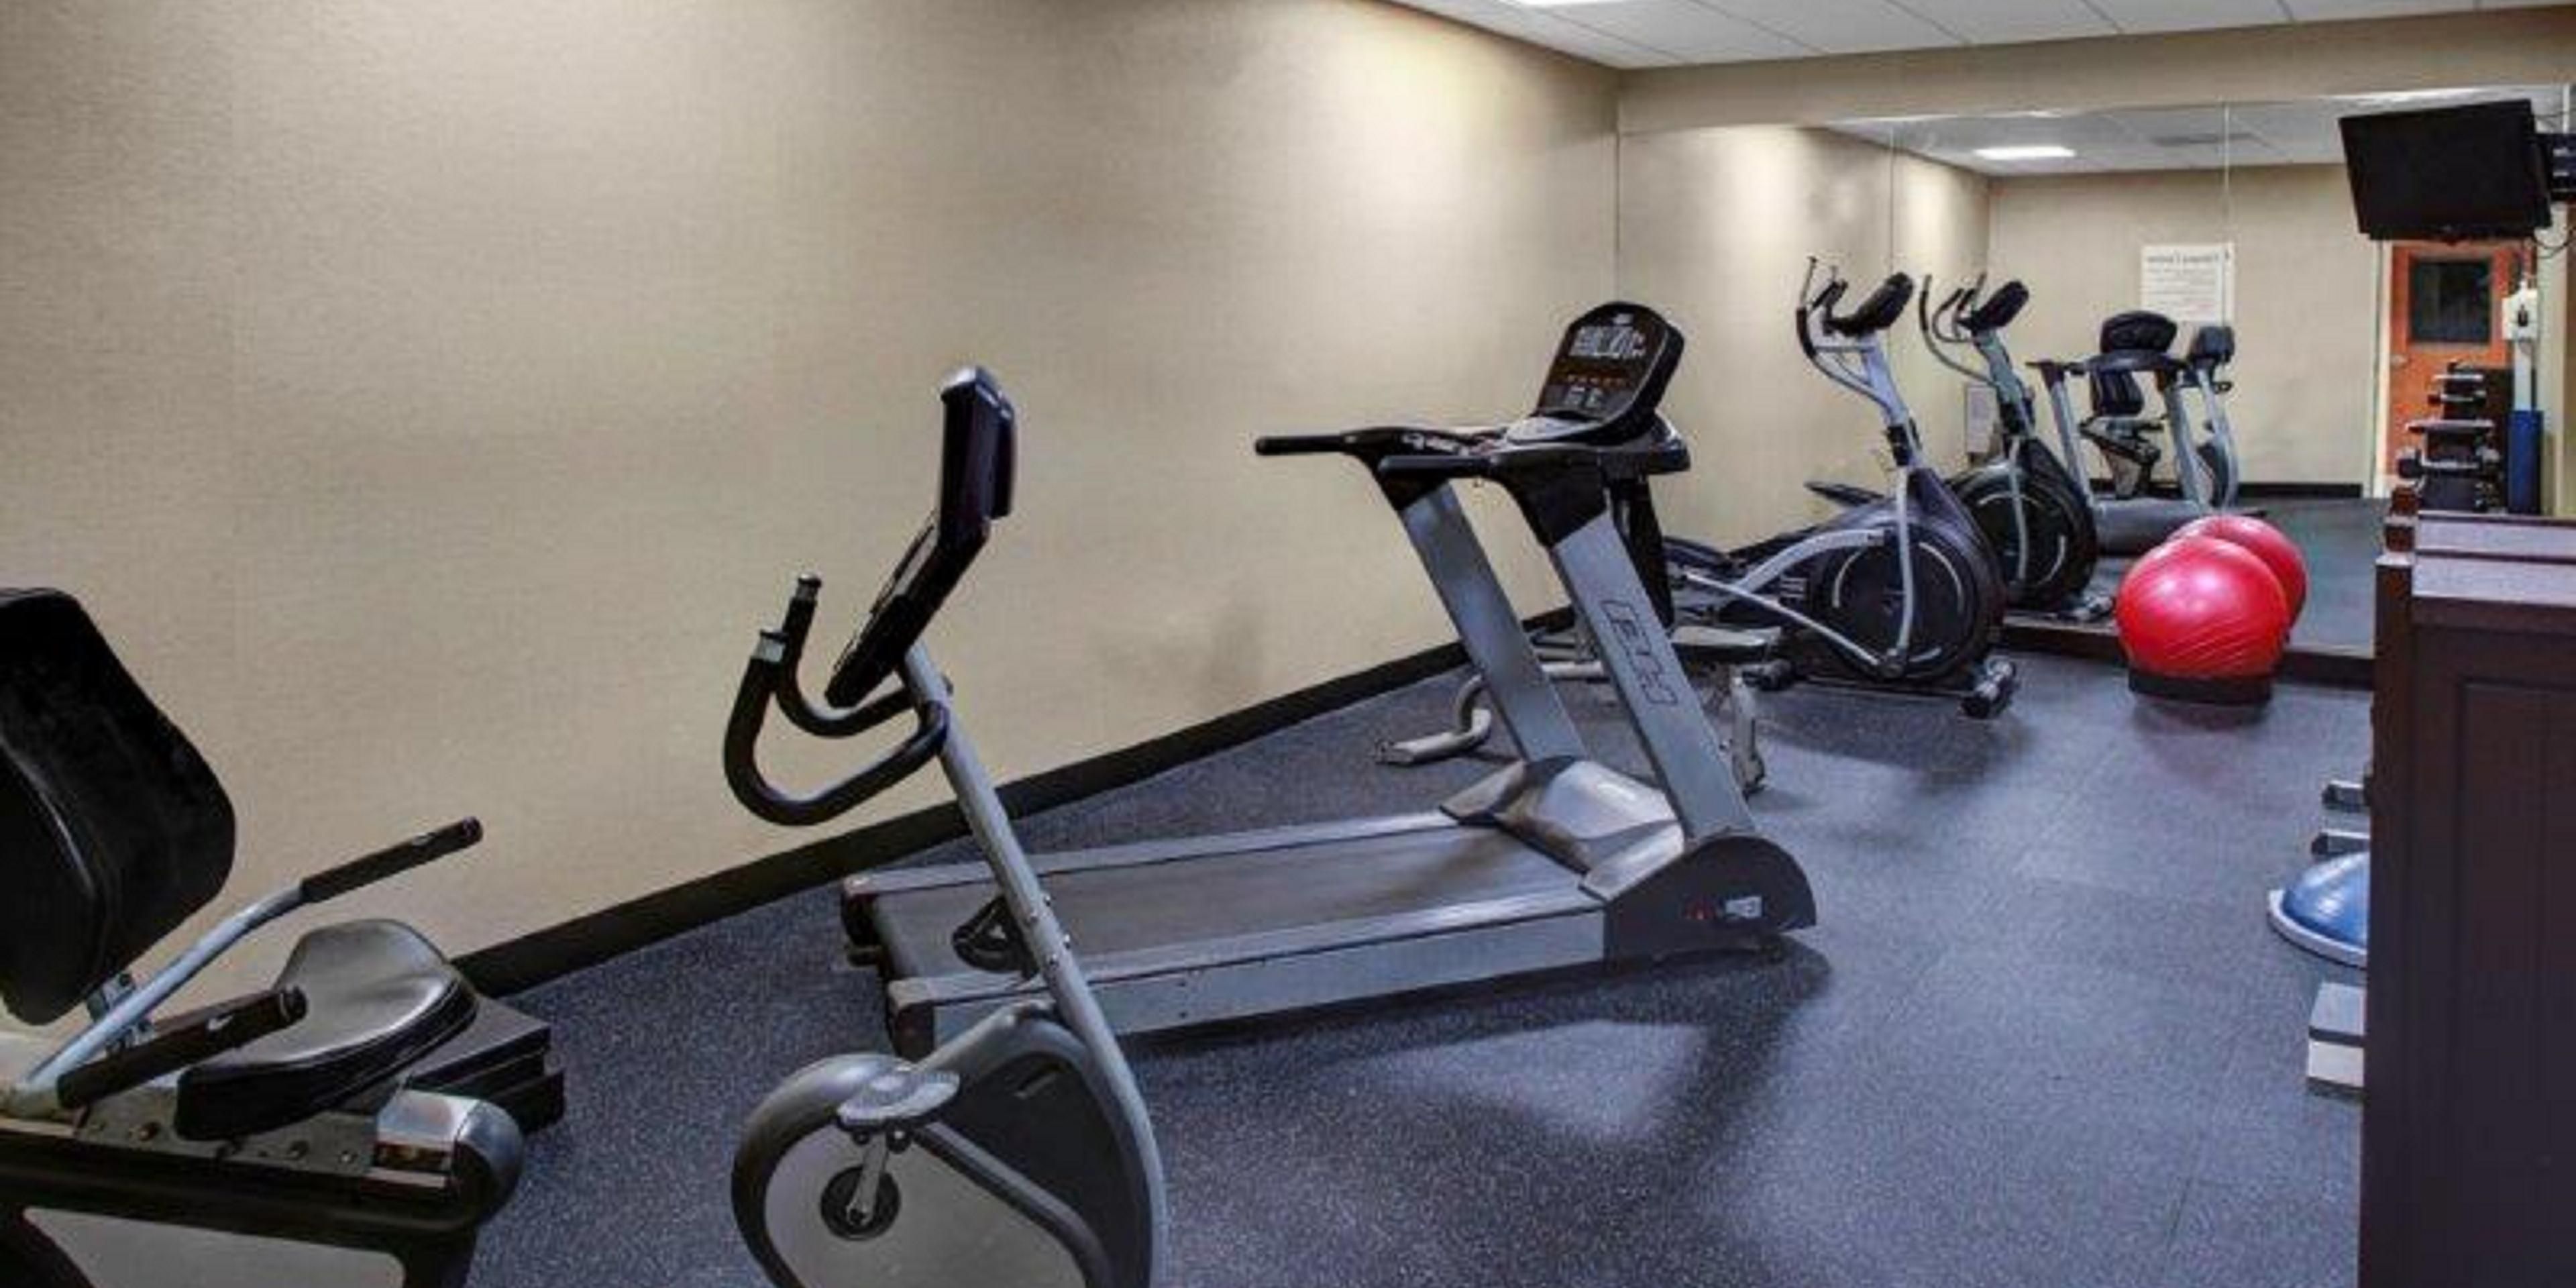 Need a quick morning workout? Visit our 24-hour on-site fitness center featuring a stair stepper, treadmill, elliptical machines, a stationary bicycle, and free weights!